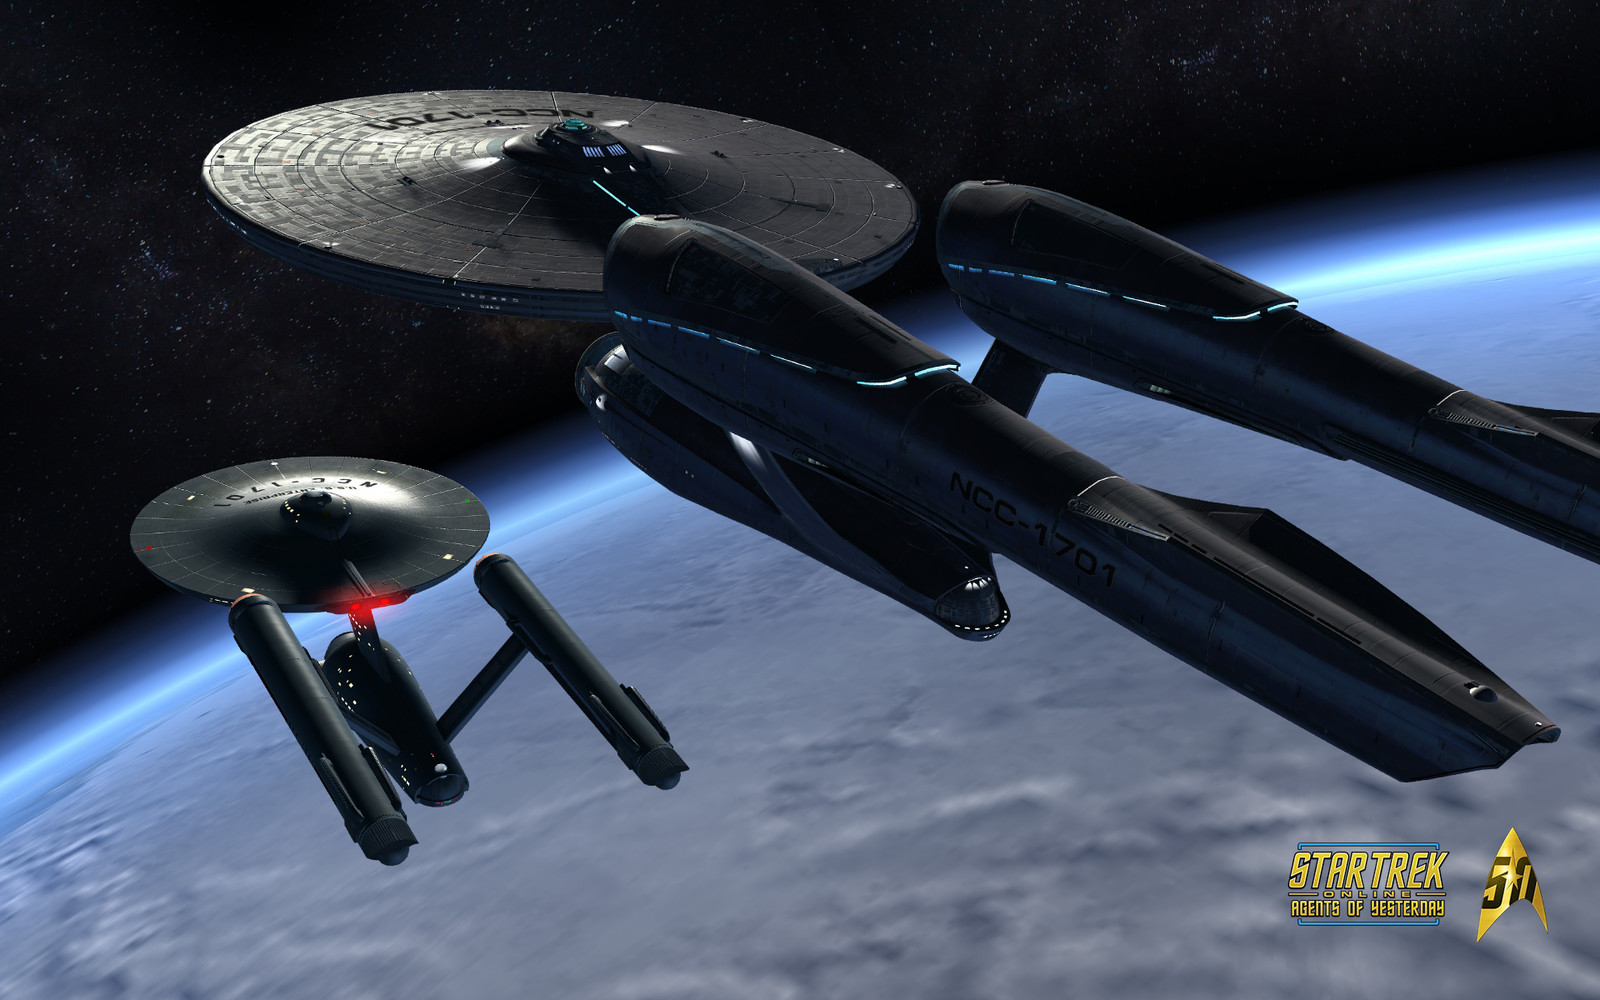 Wallpaper made using a composite of STO in-game screenshots and stock imagery.